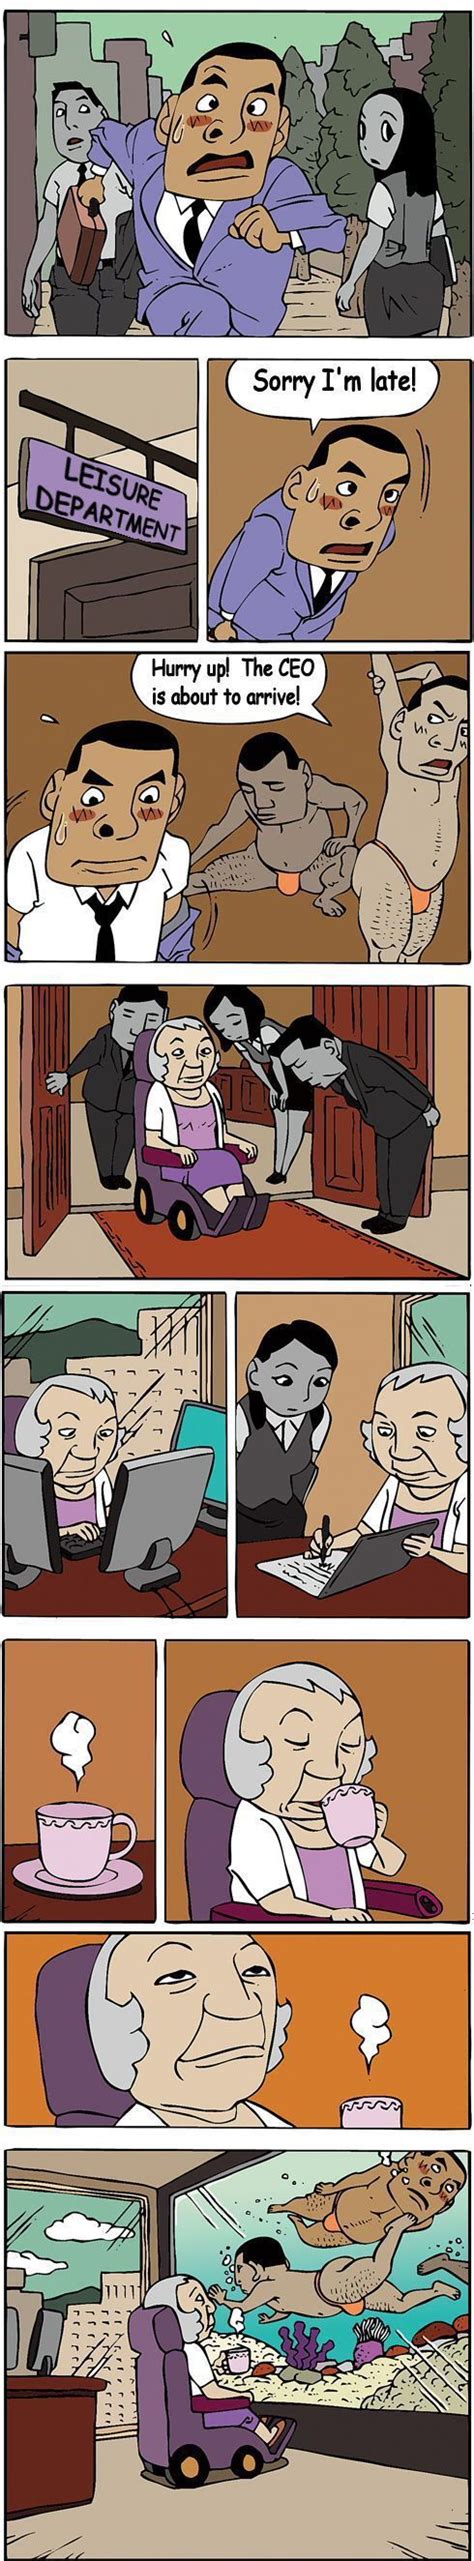 the comic strip shows an older man and woman talking to each other